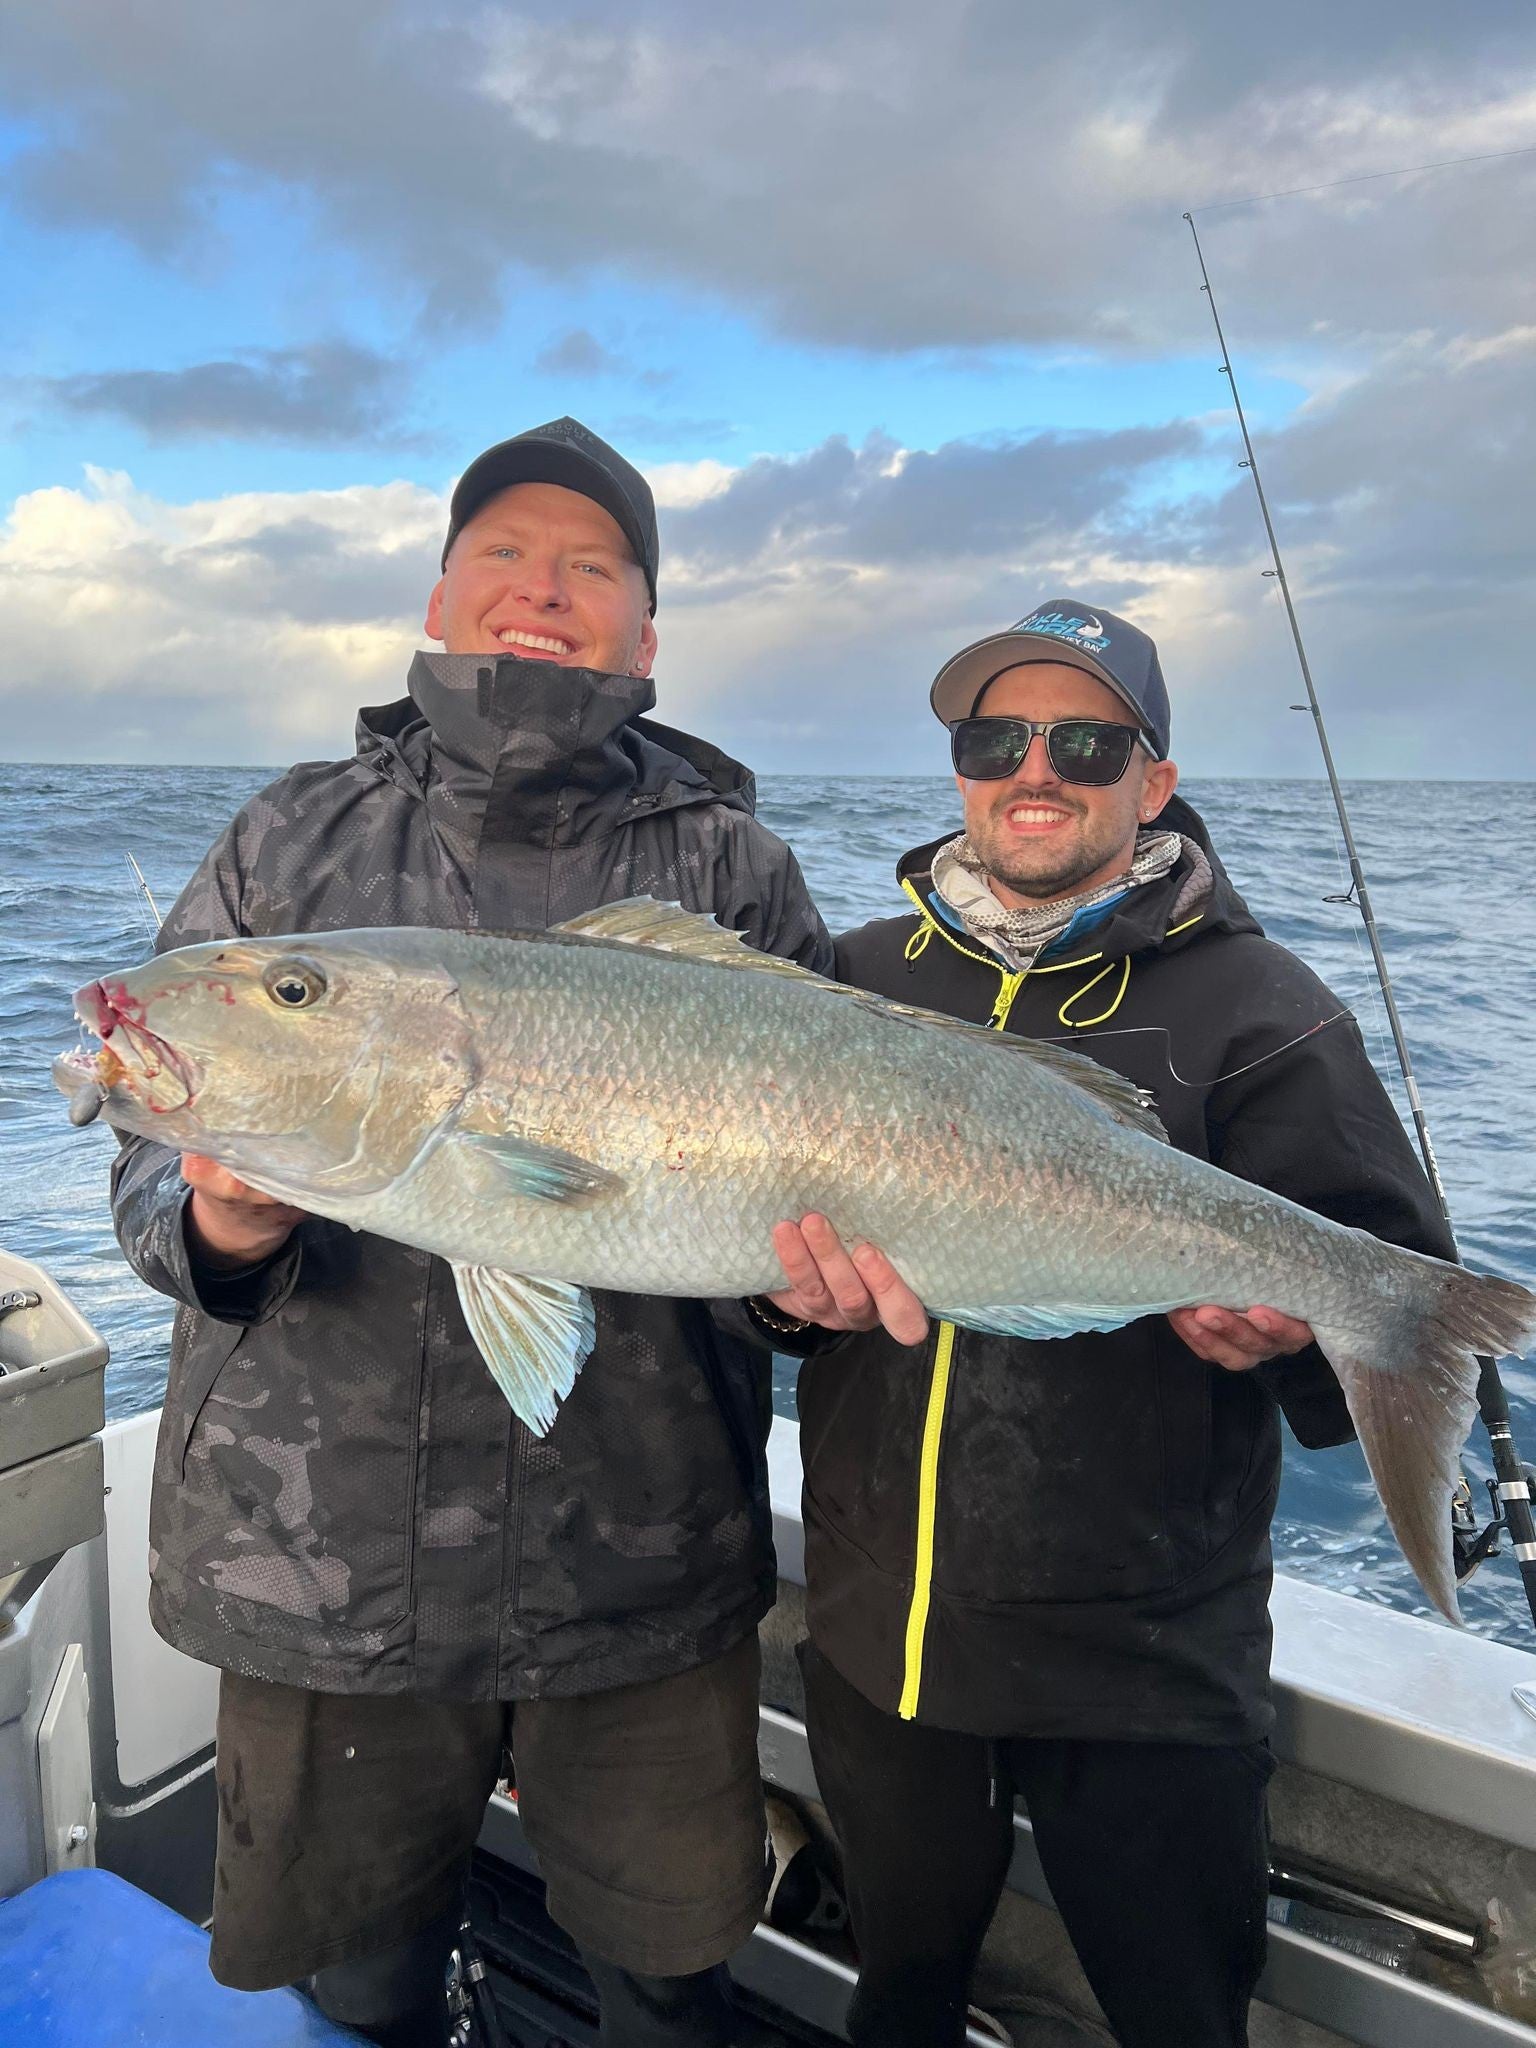 Weekly Fishing Report - 21st July 2021